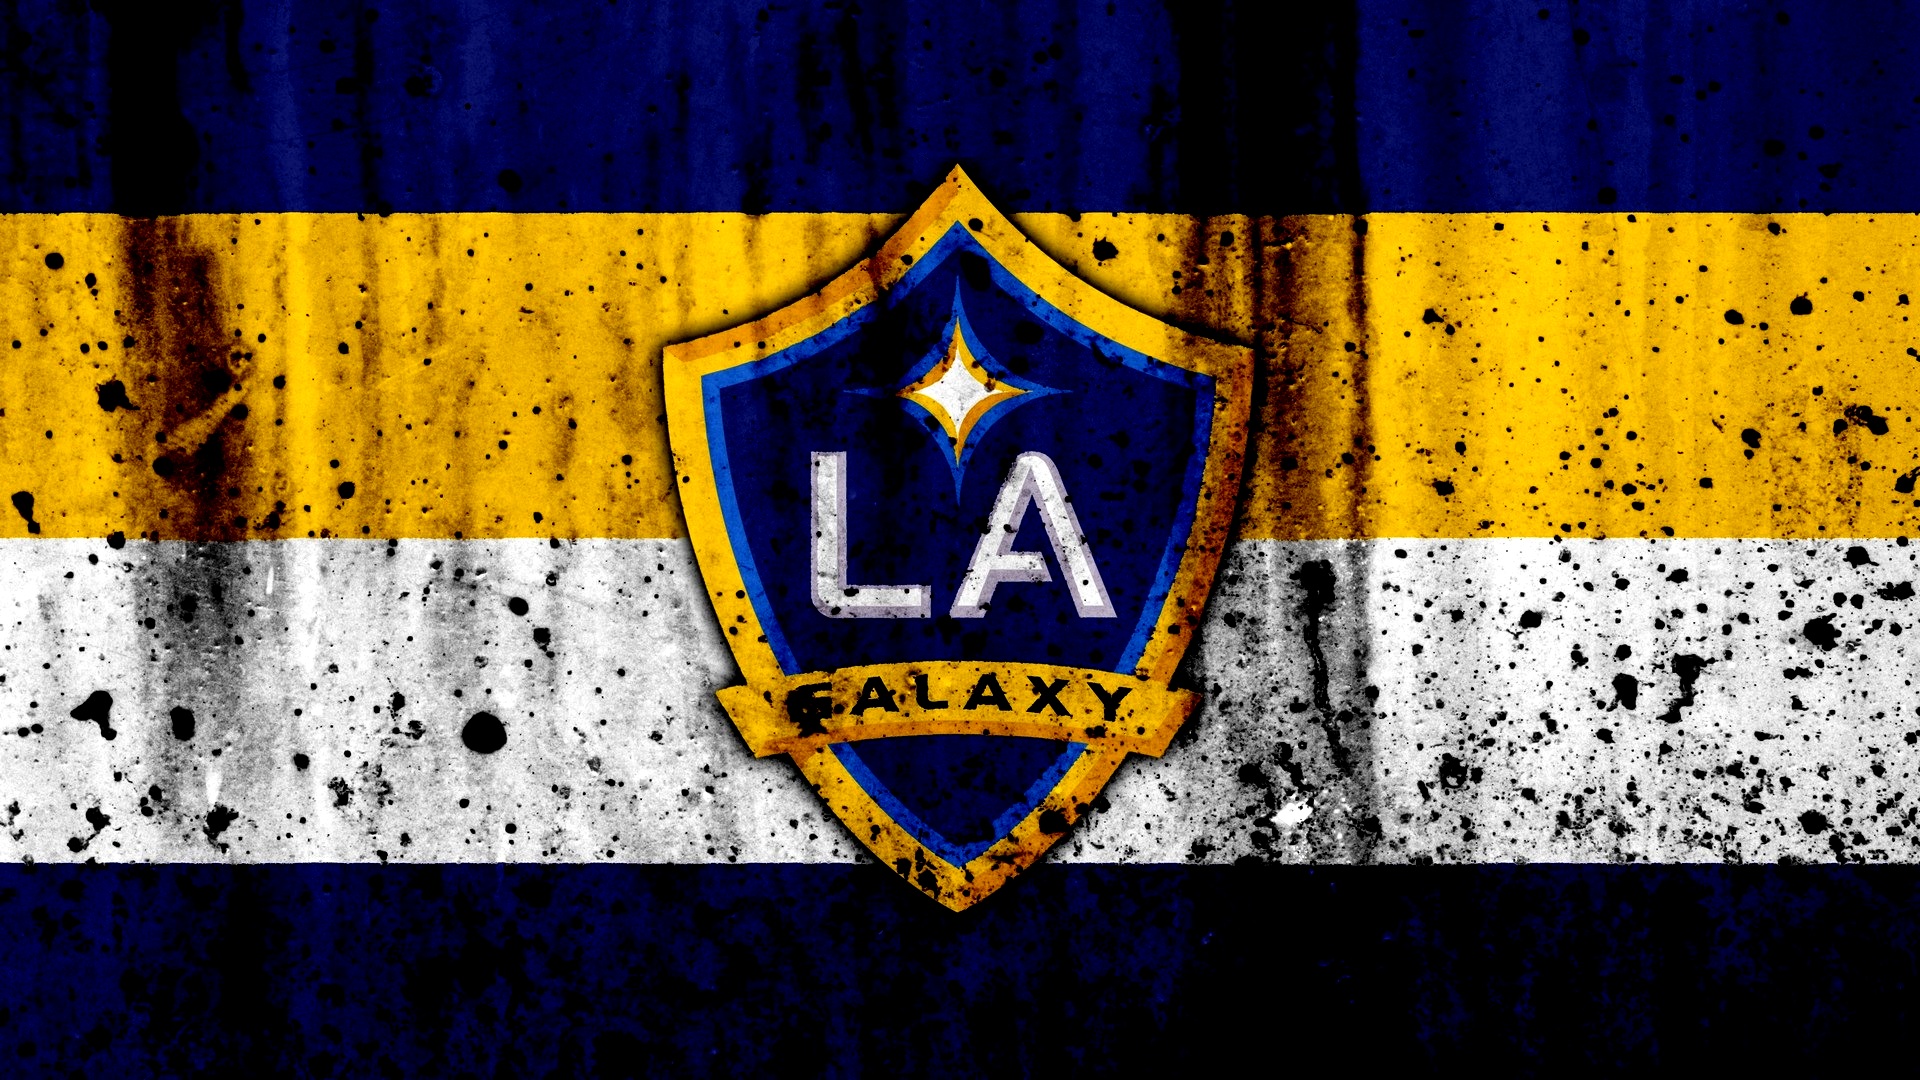 LA Galaxy HD Wallpapers With high-resolution 1920X1080 pixel. You can use this wallpaper for your Desktop Computers, Mac Screensavers, Windows Backgrounds, iPhone Wallpapers, Tablet or Android Lock screen and another Mobile device